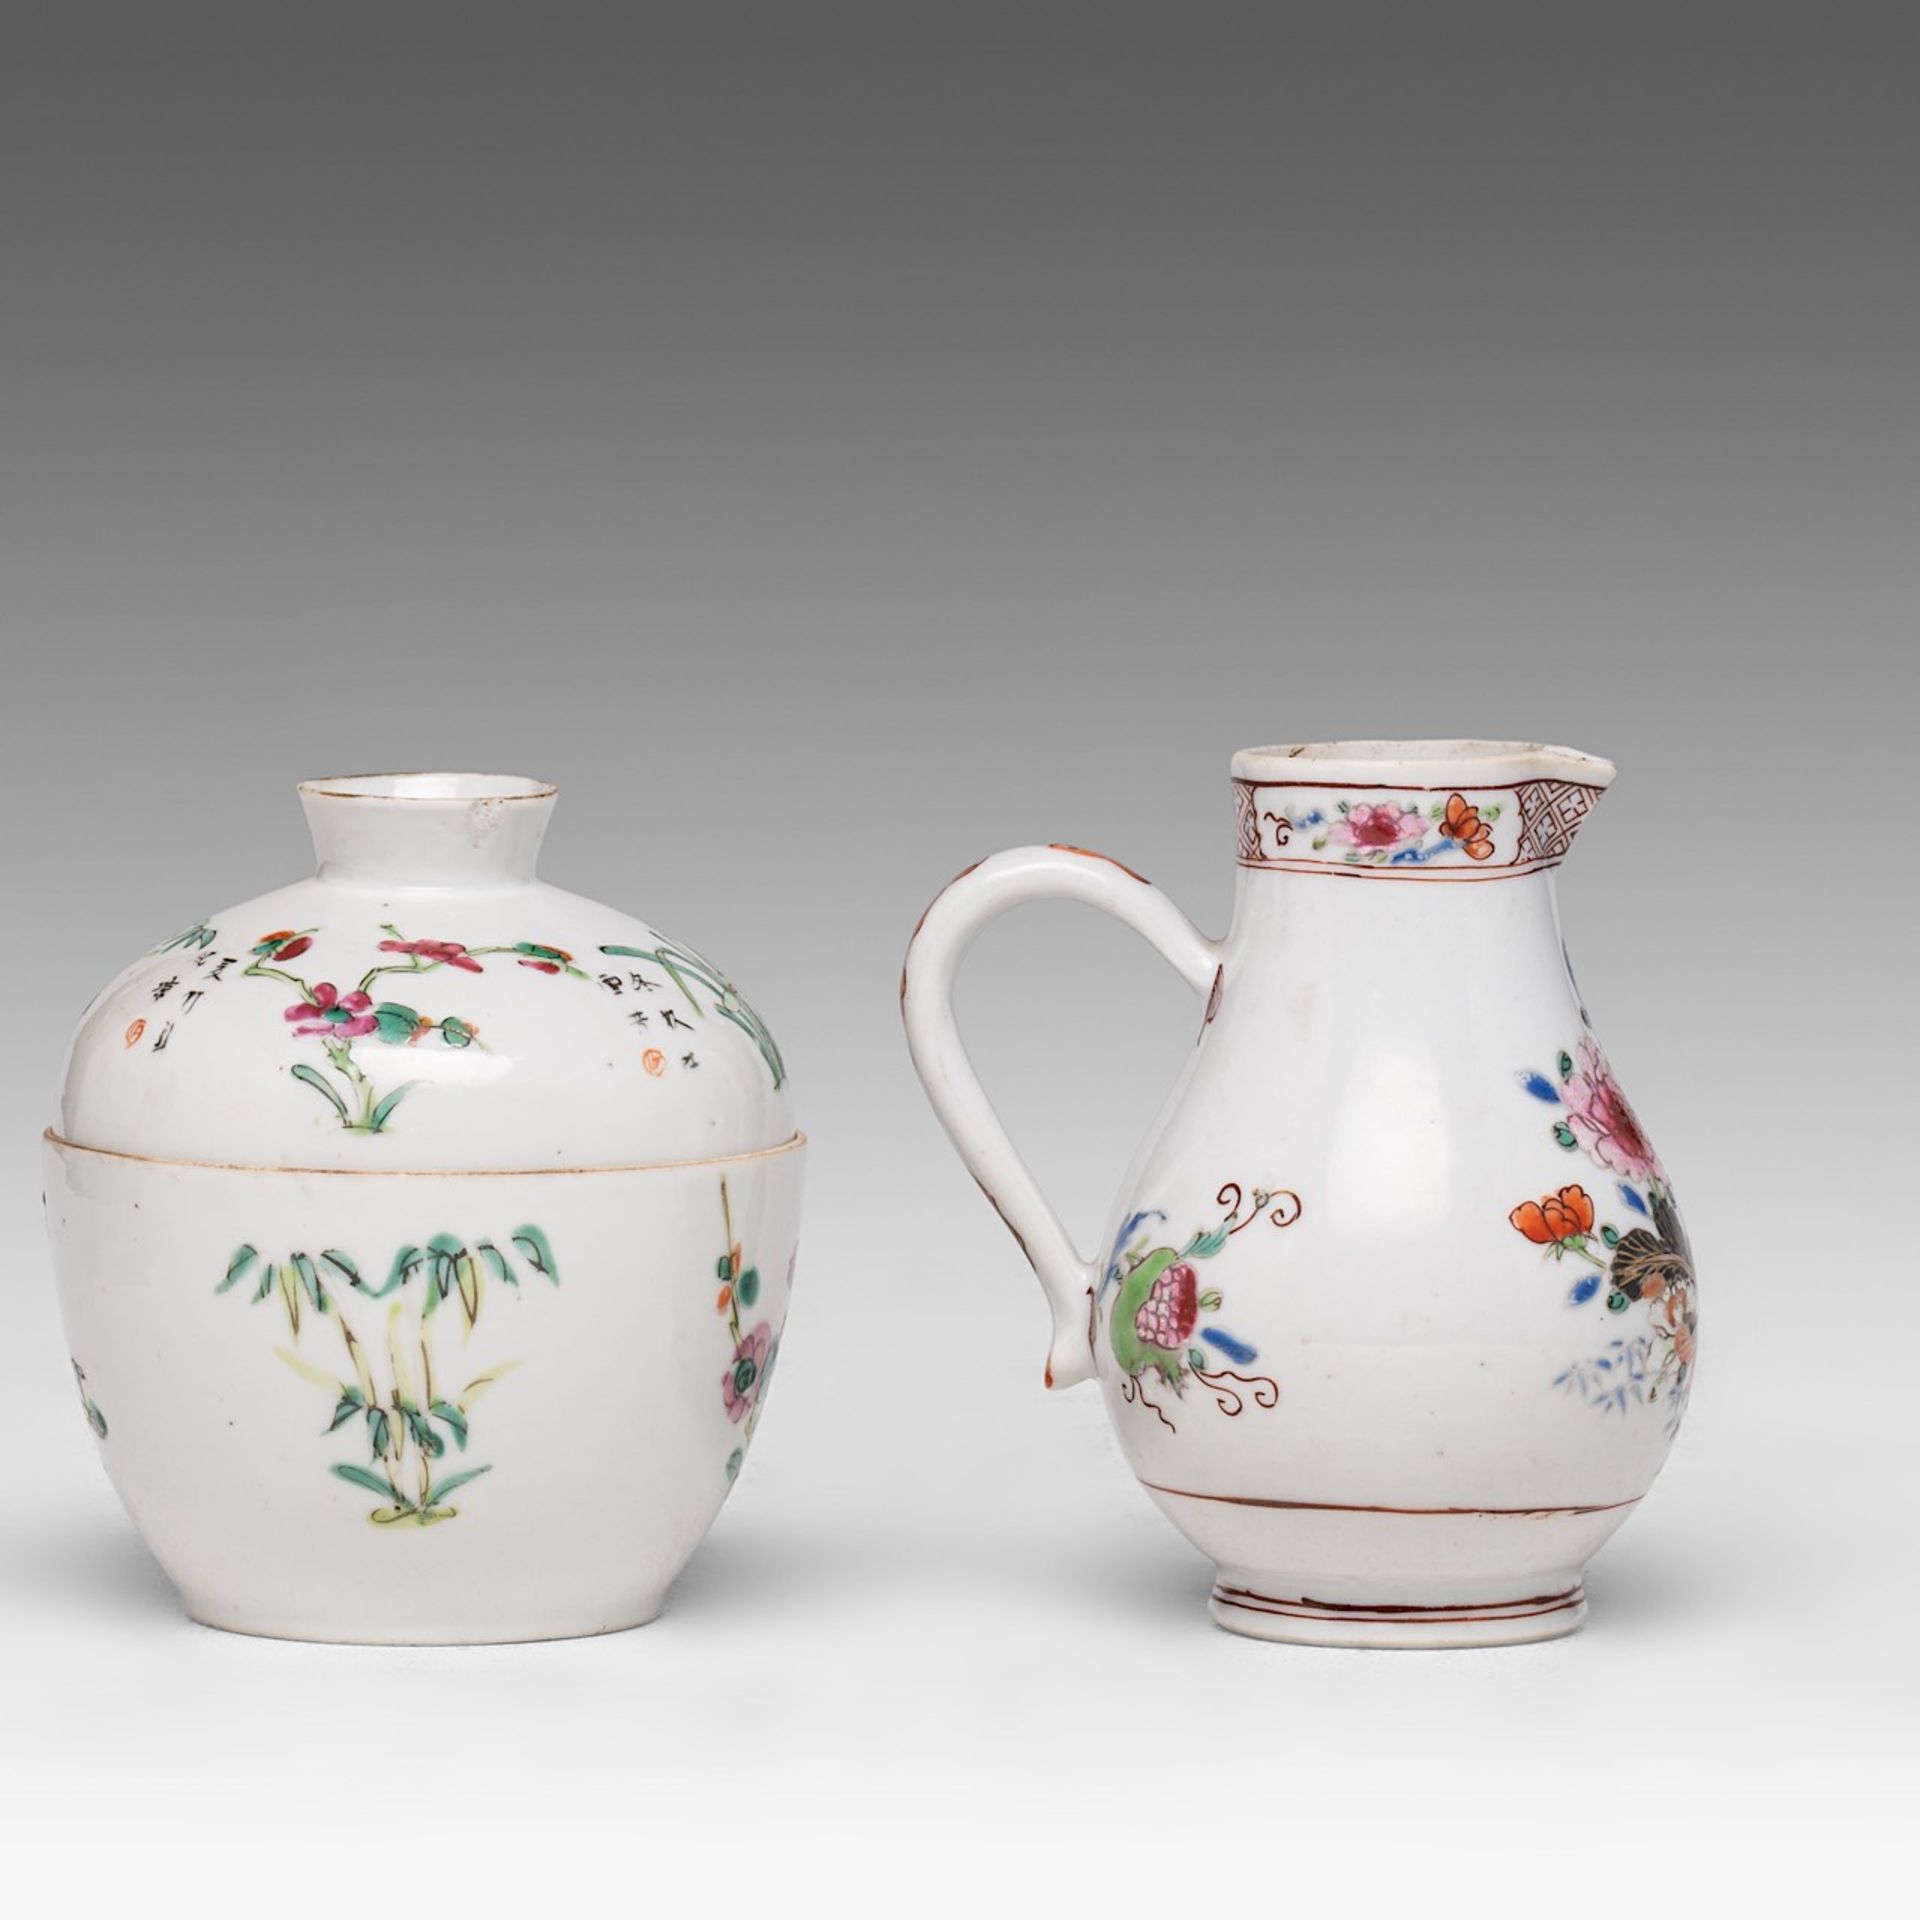 A collection of four Chinese scholar's objects, incl. a brush pot with inscriptions, late 18thC - ad - Bild 9 aus 29